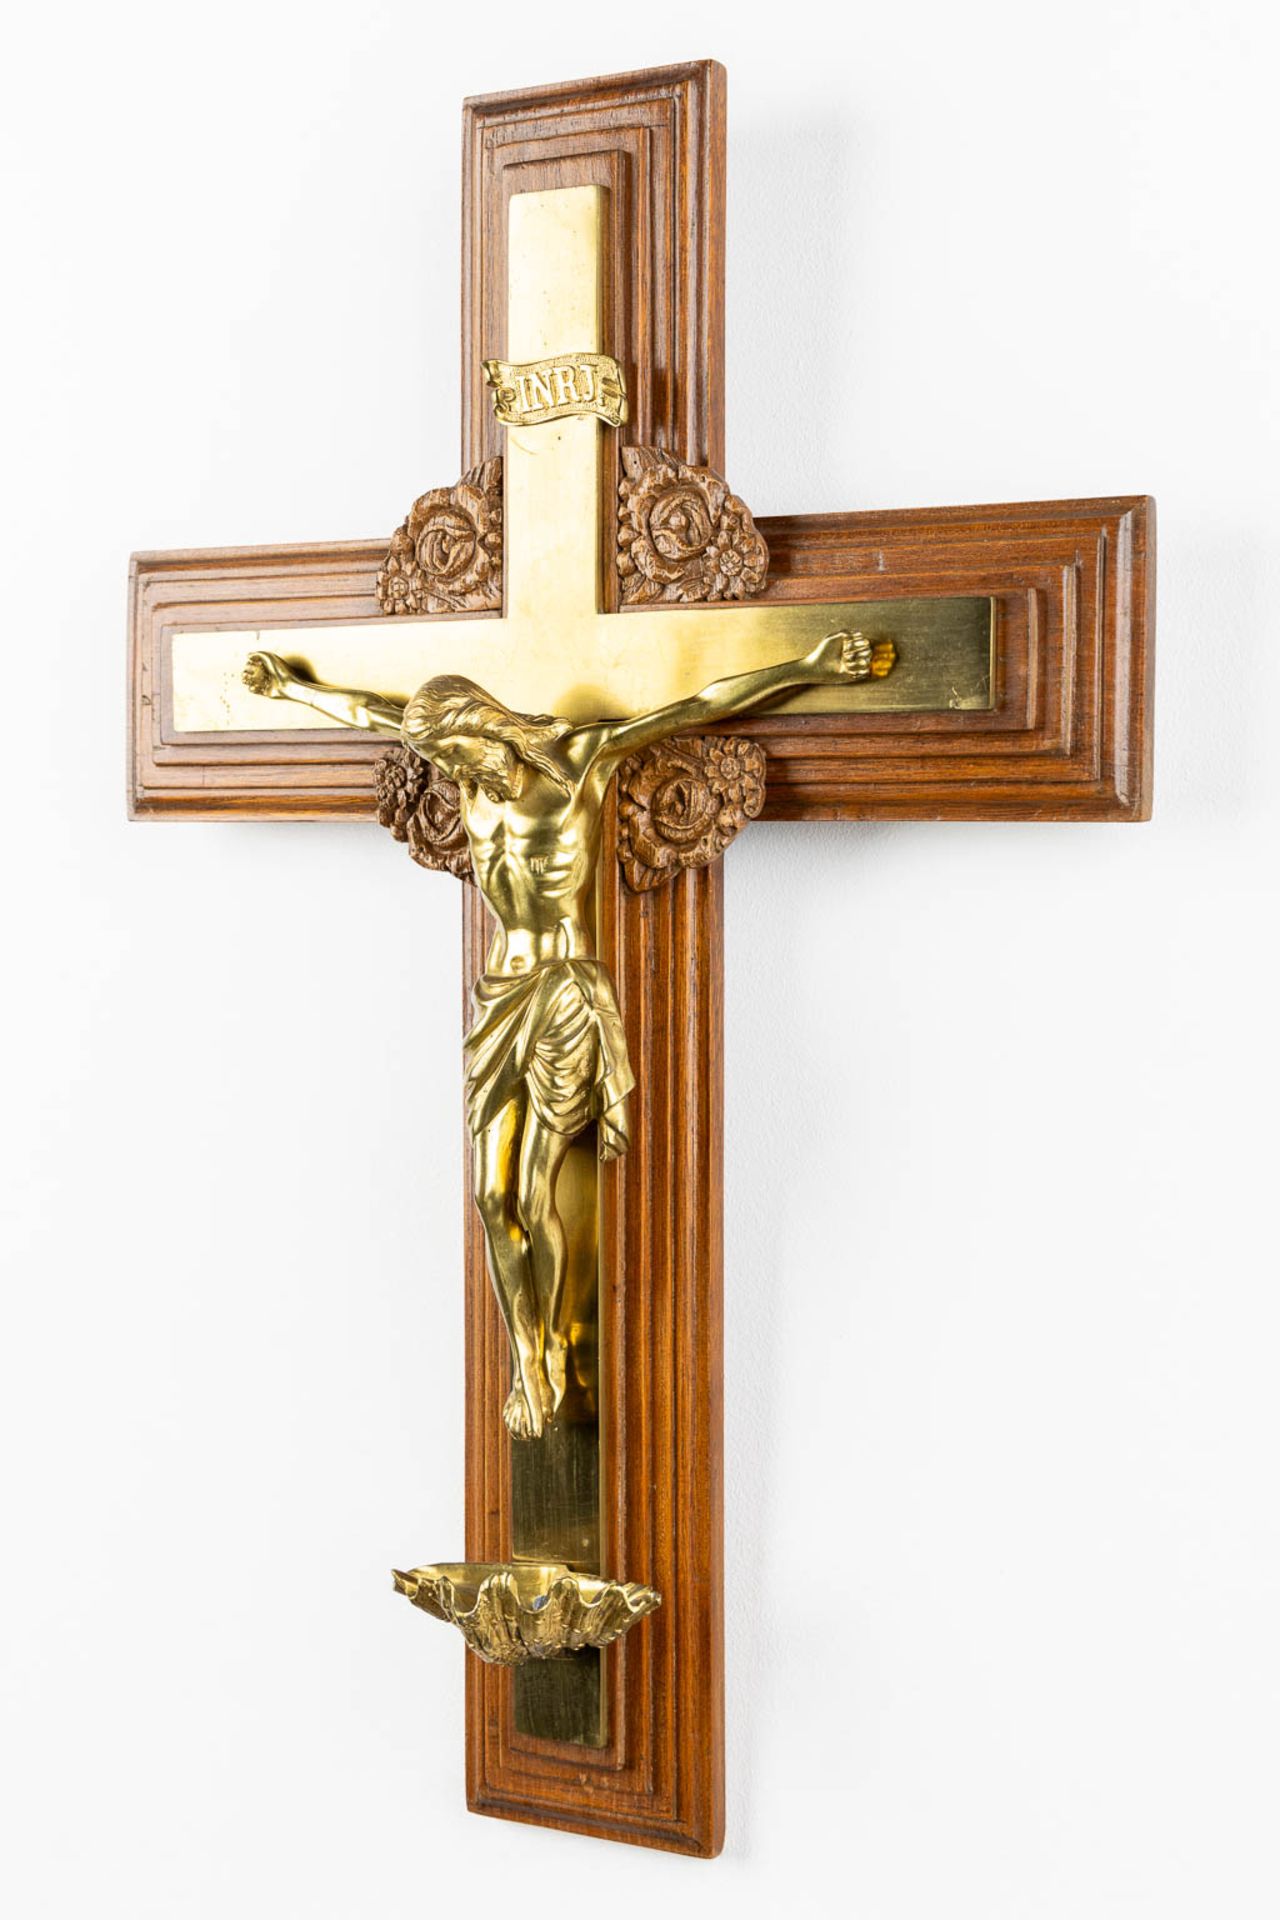 A crucifix with small holy water font, bronze mounted on wood. (W:41 x H:60 cm) - Image 3 of 9